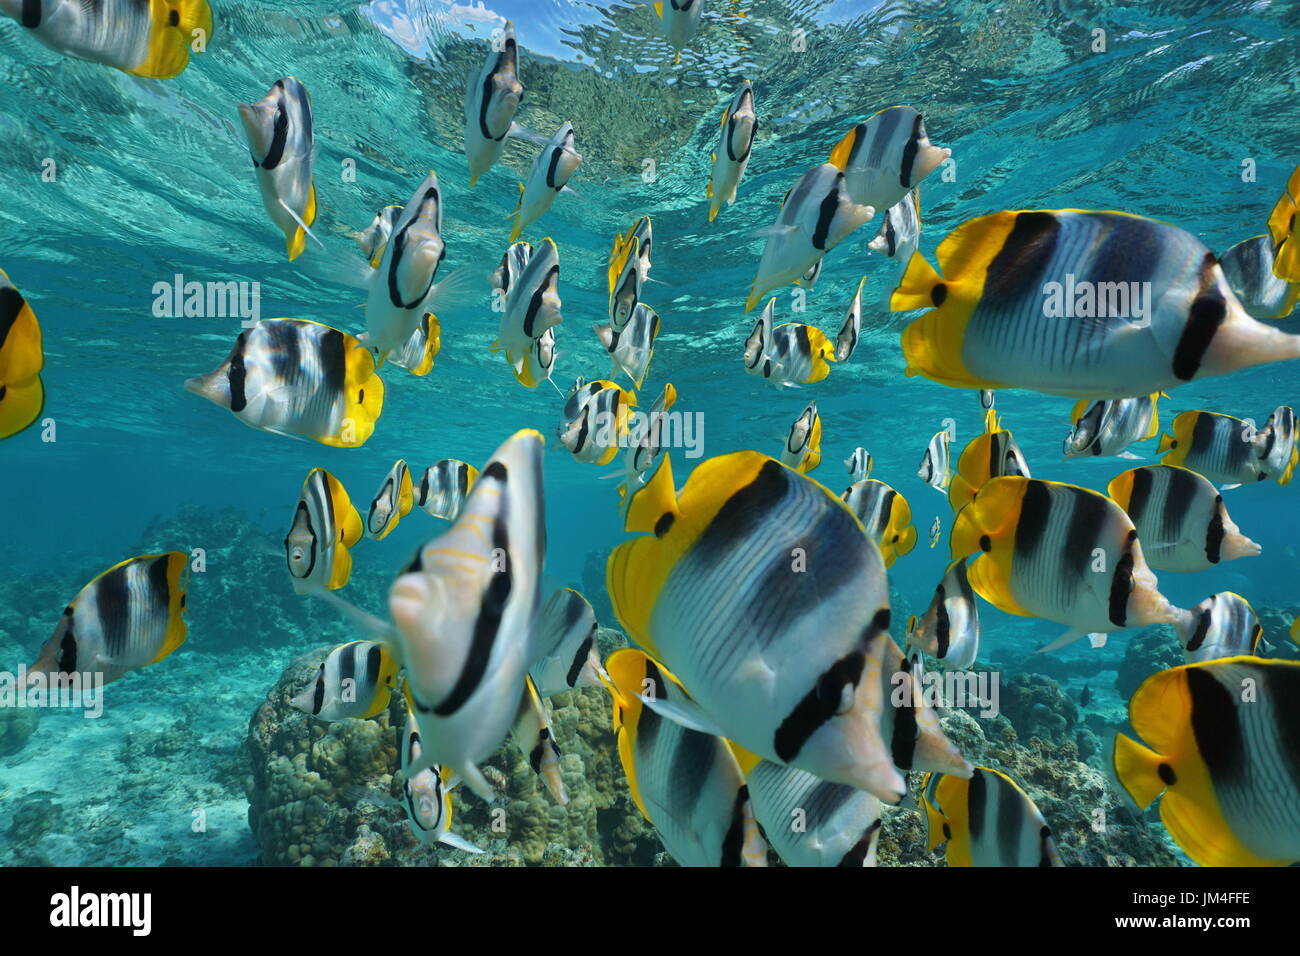 Shoal of fish Pacific double-saddle butterflyfish, Chaetodon ulietensis, underwater in the Pacific ocean, French Polynesia, Oceania Stock Photo